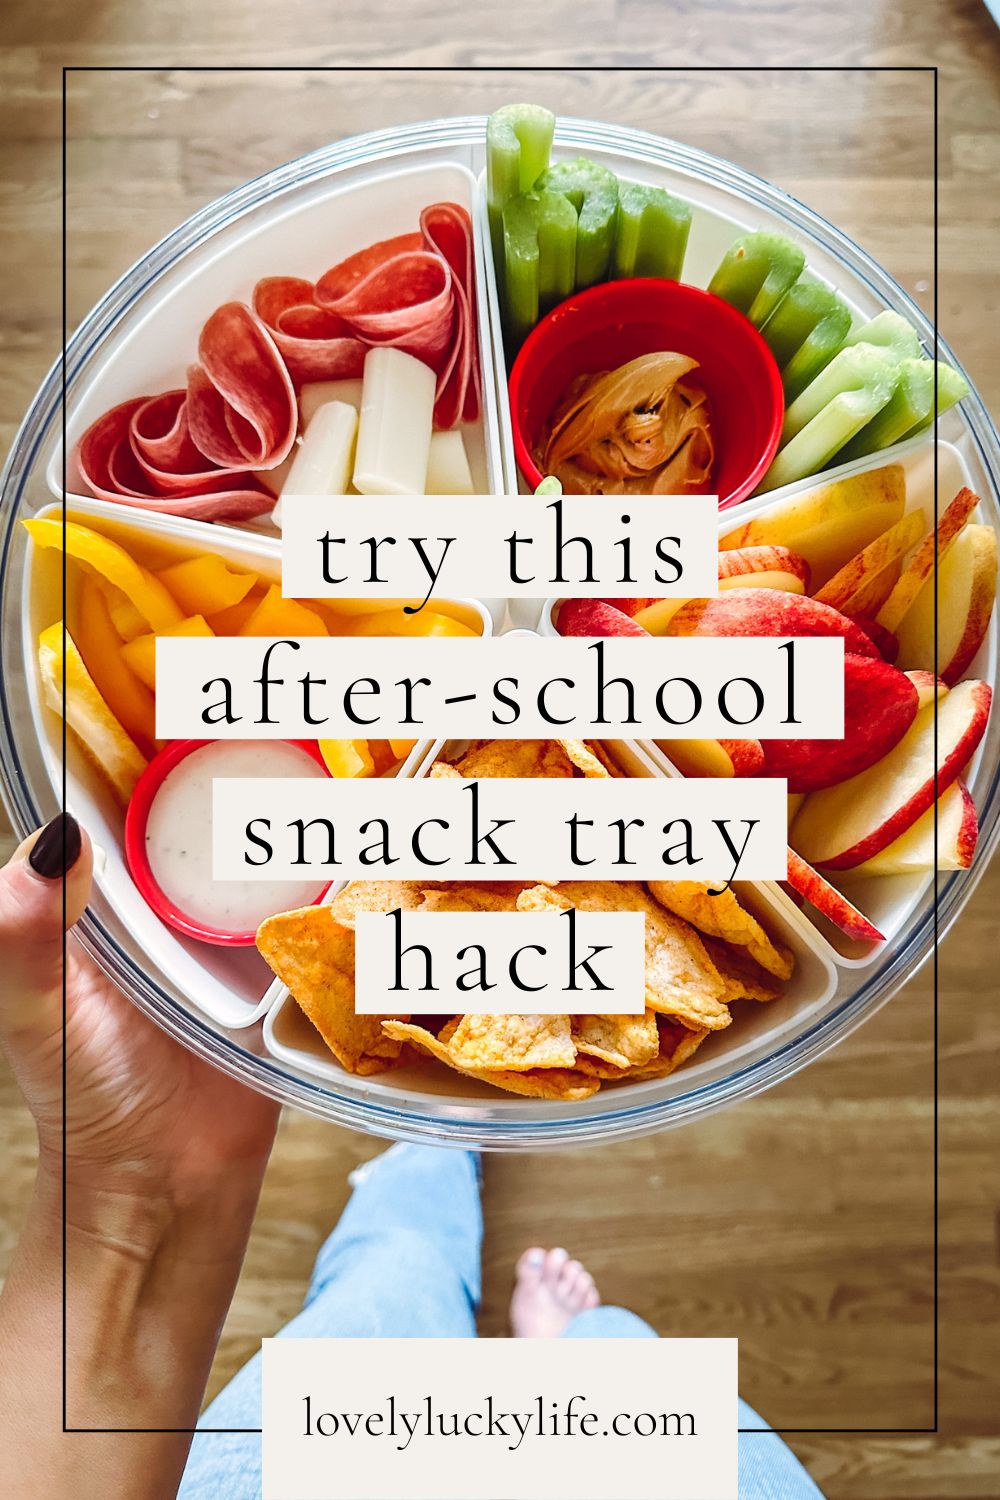 Try This After-School Snack Tray Hack from LovelyLuckyLife